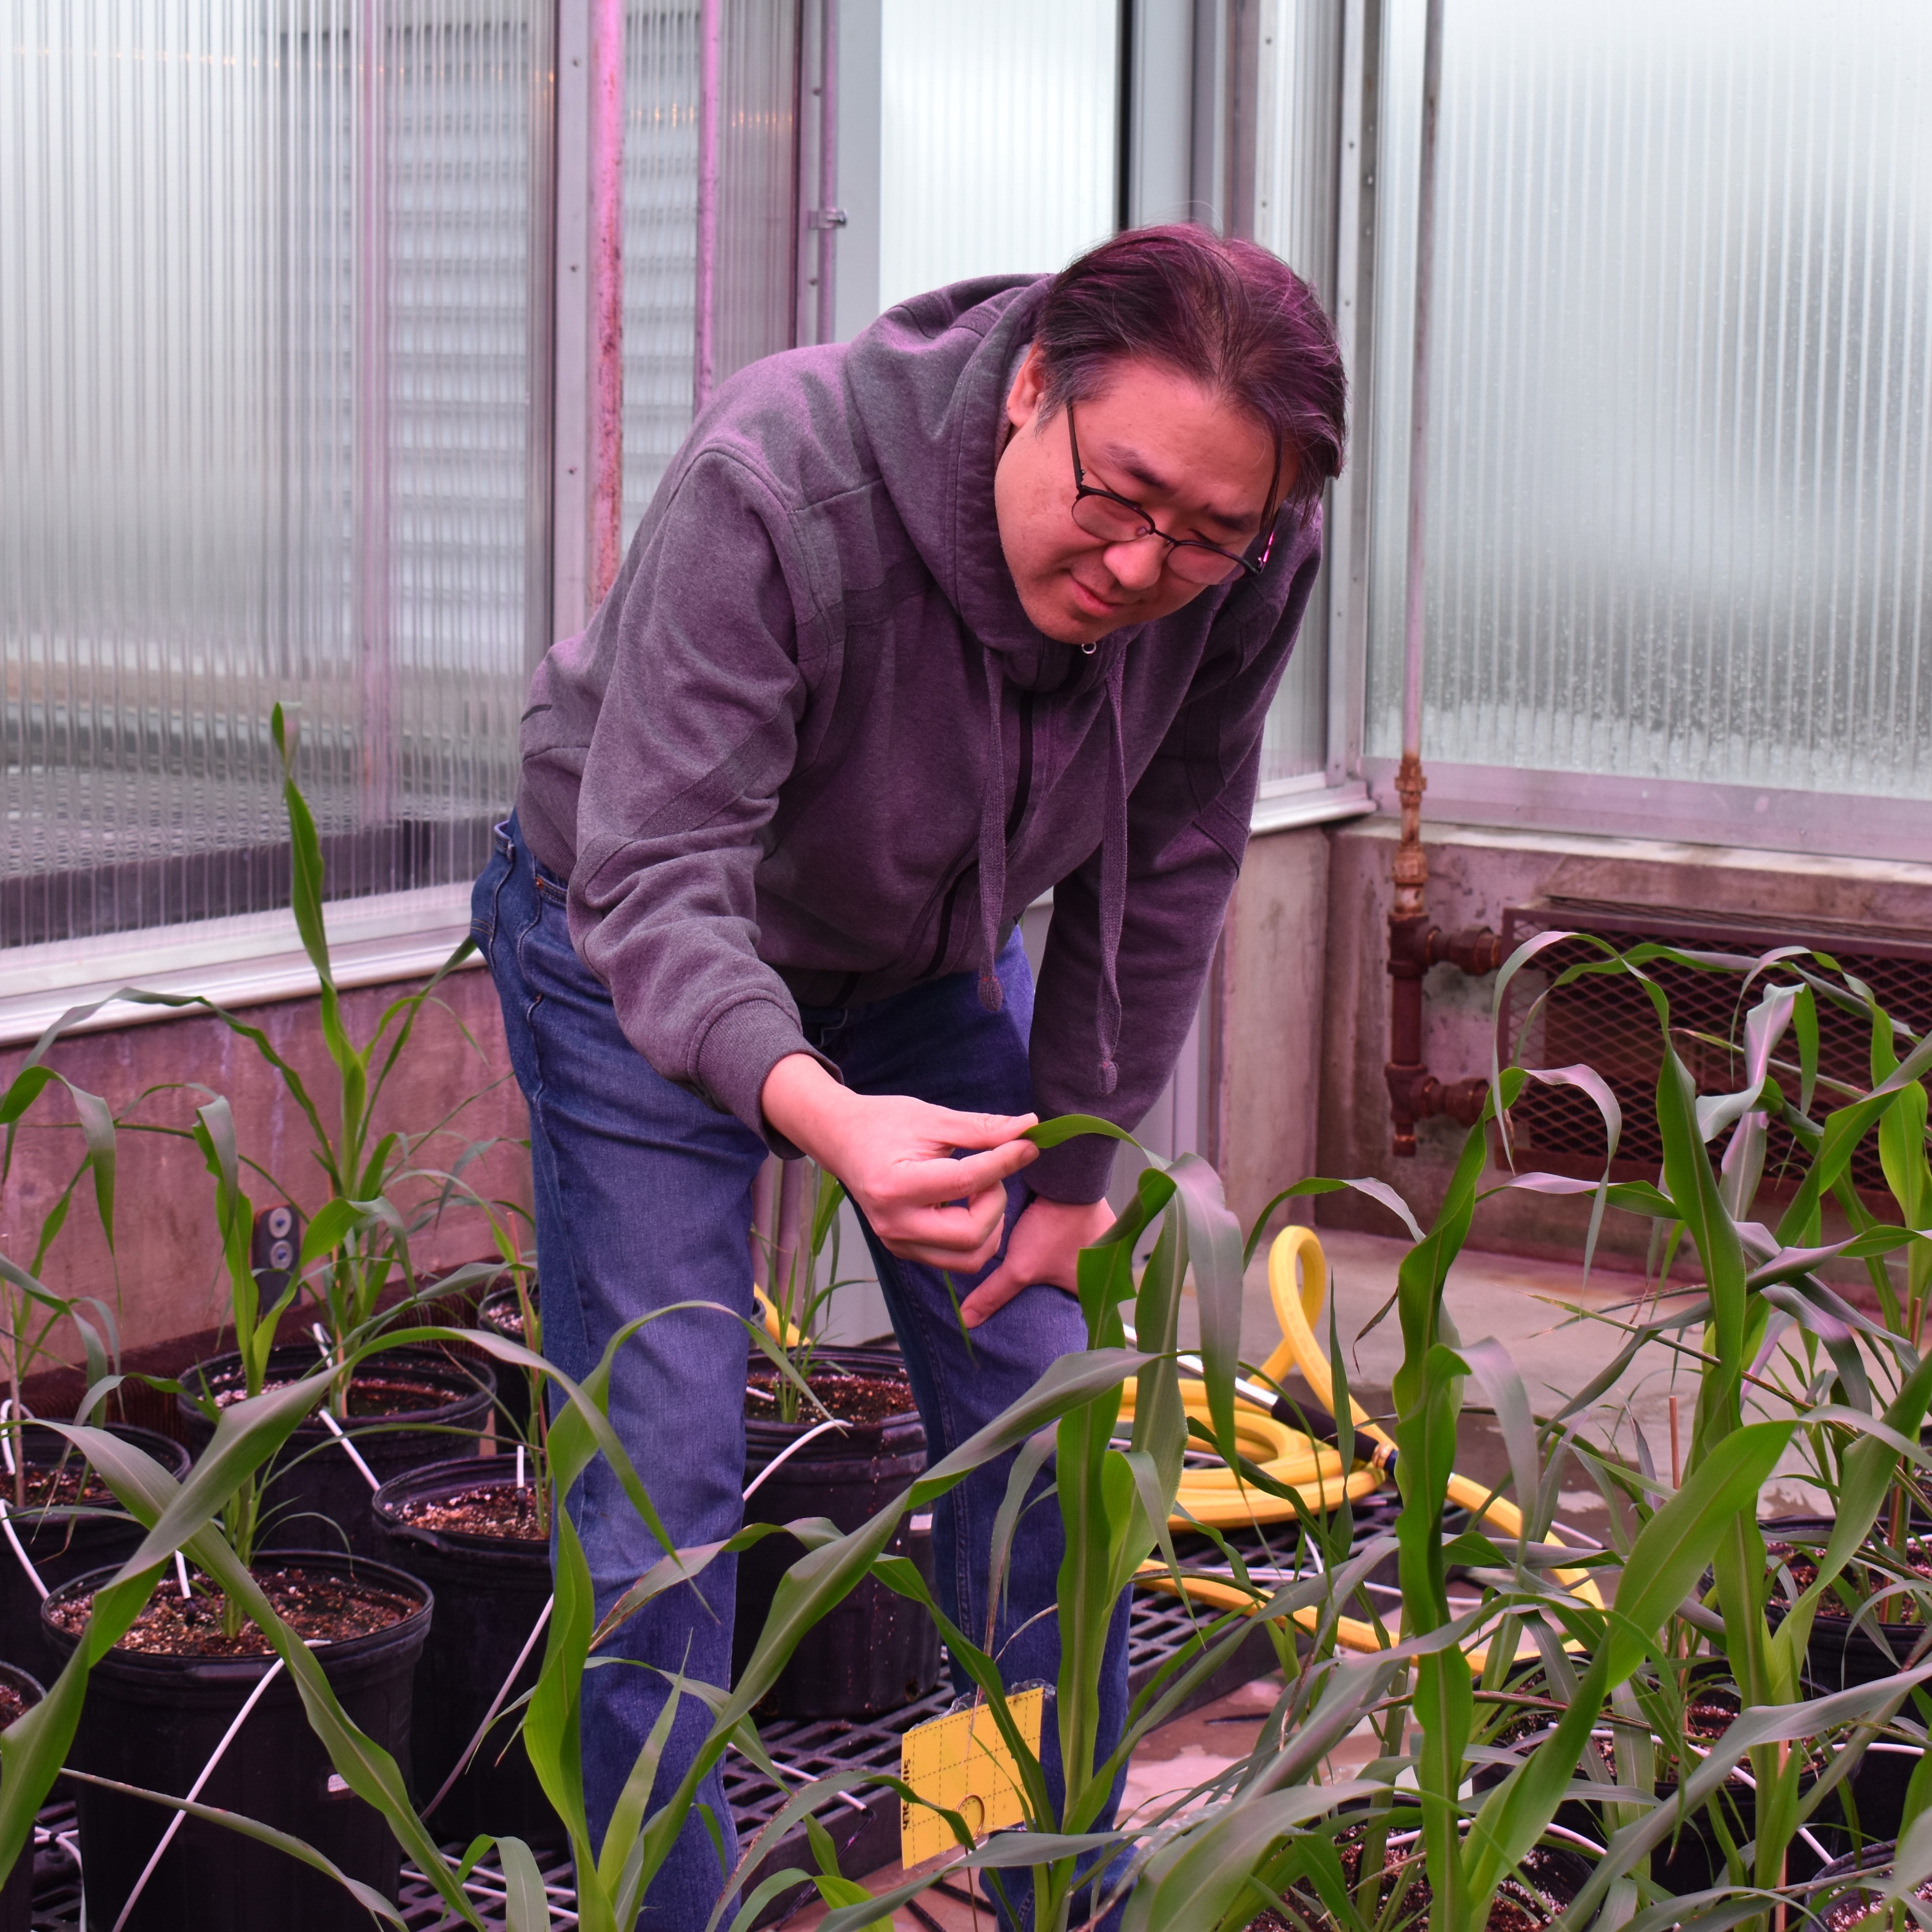 A man leans forward, inspecting a leafy green plant in a greenhouse.